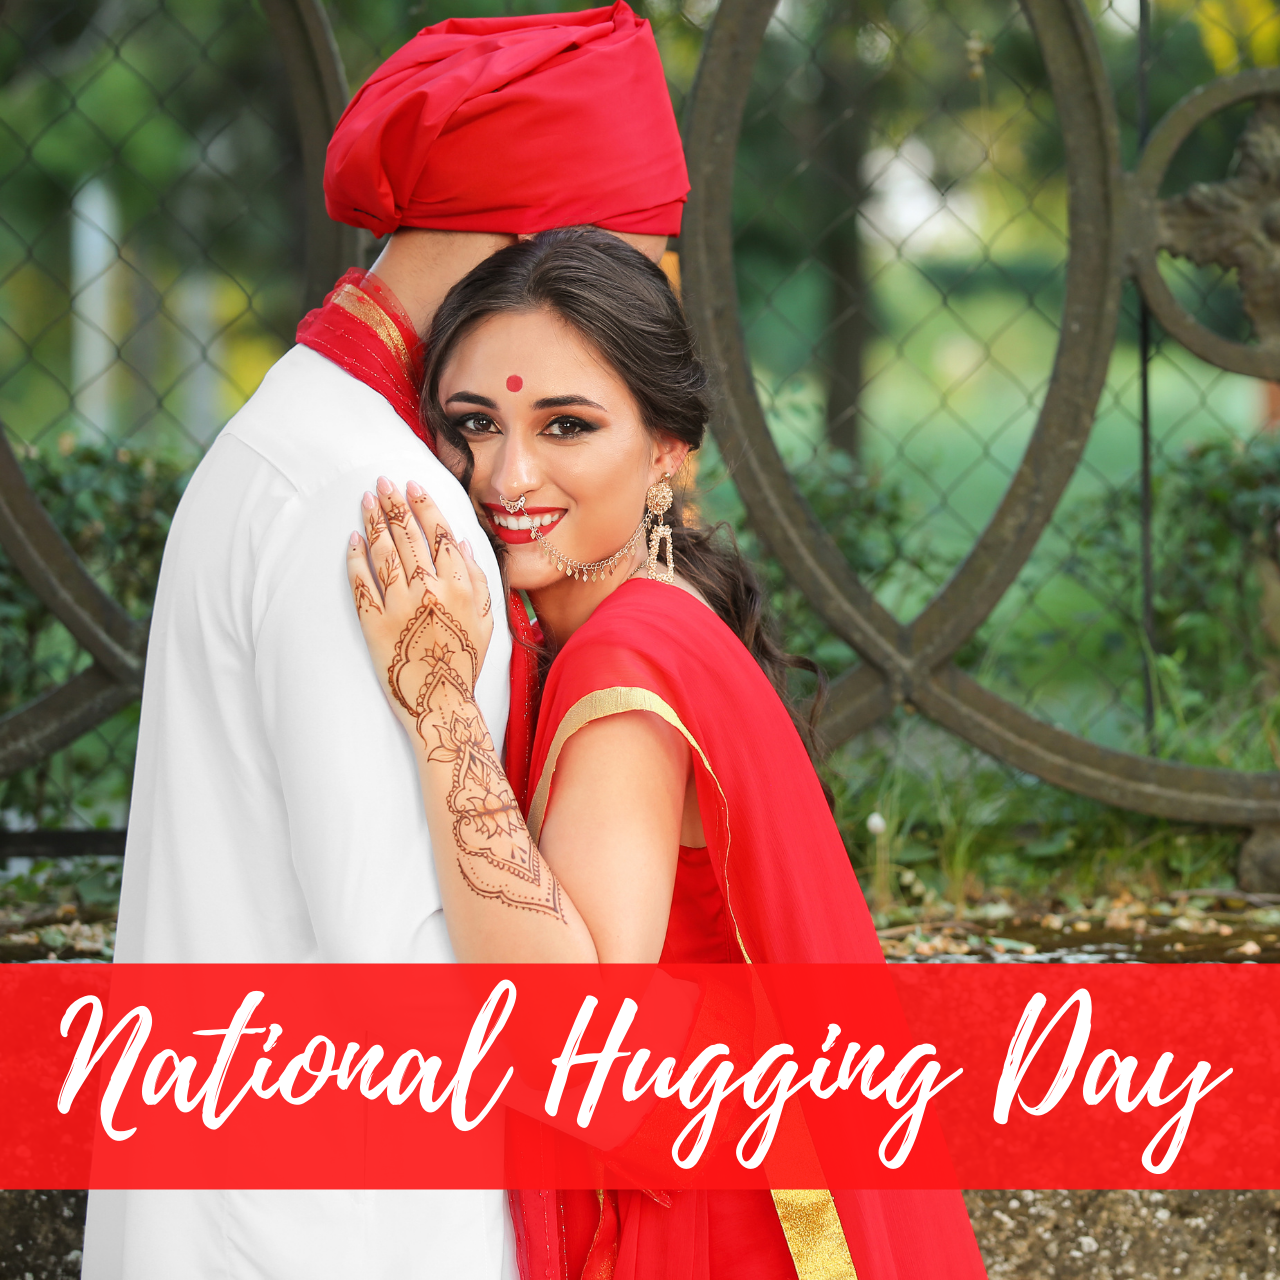 National Hugging Day 2022: Wishes, Quotes, HD Images, Cliparts, Memes to share